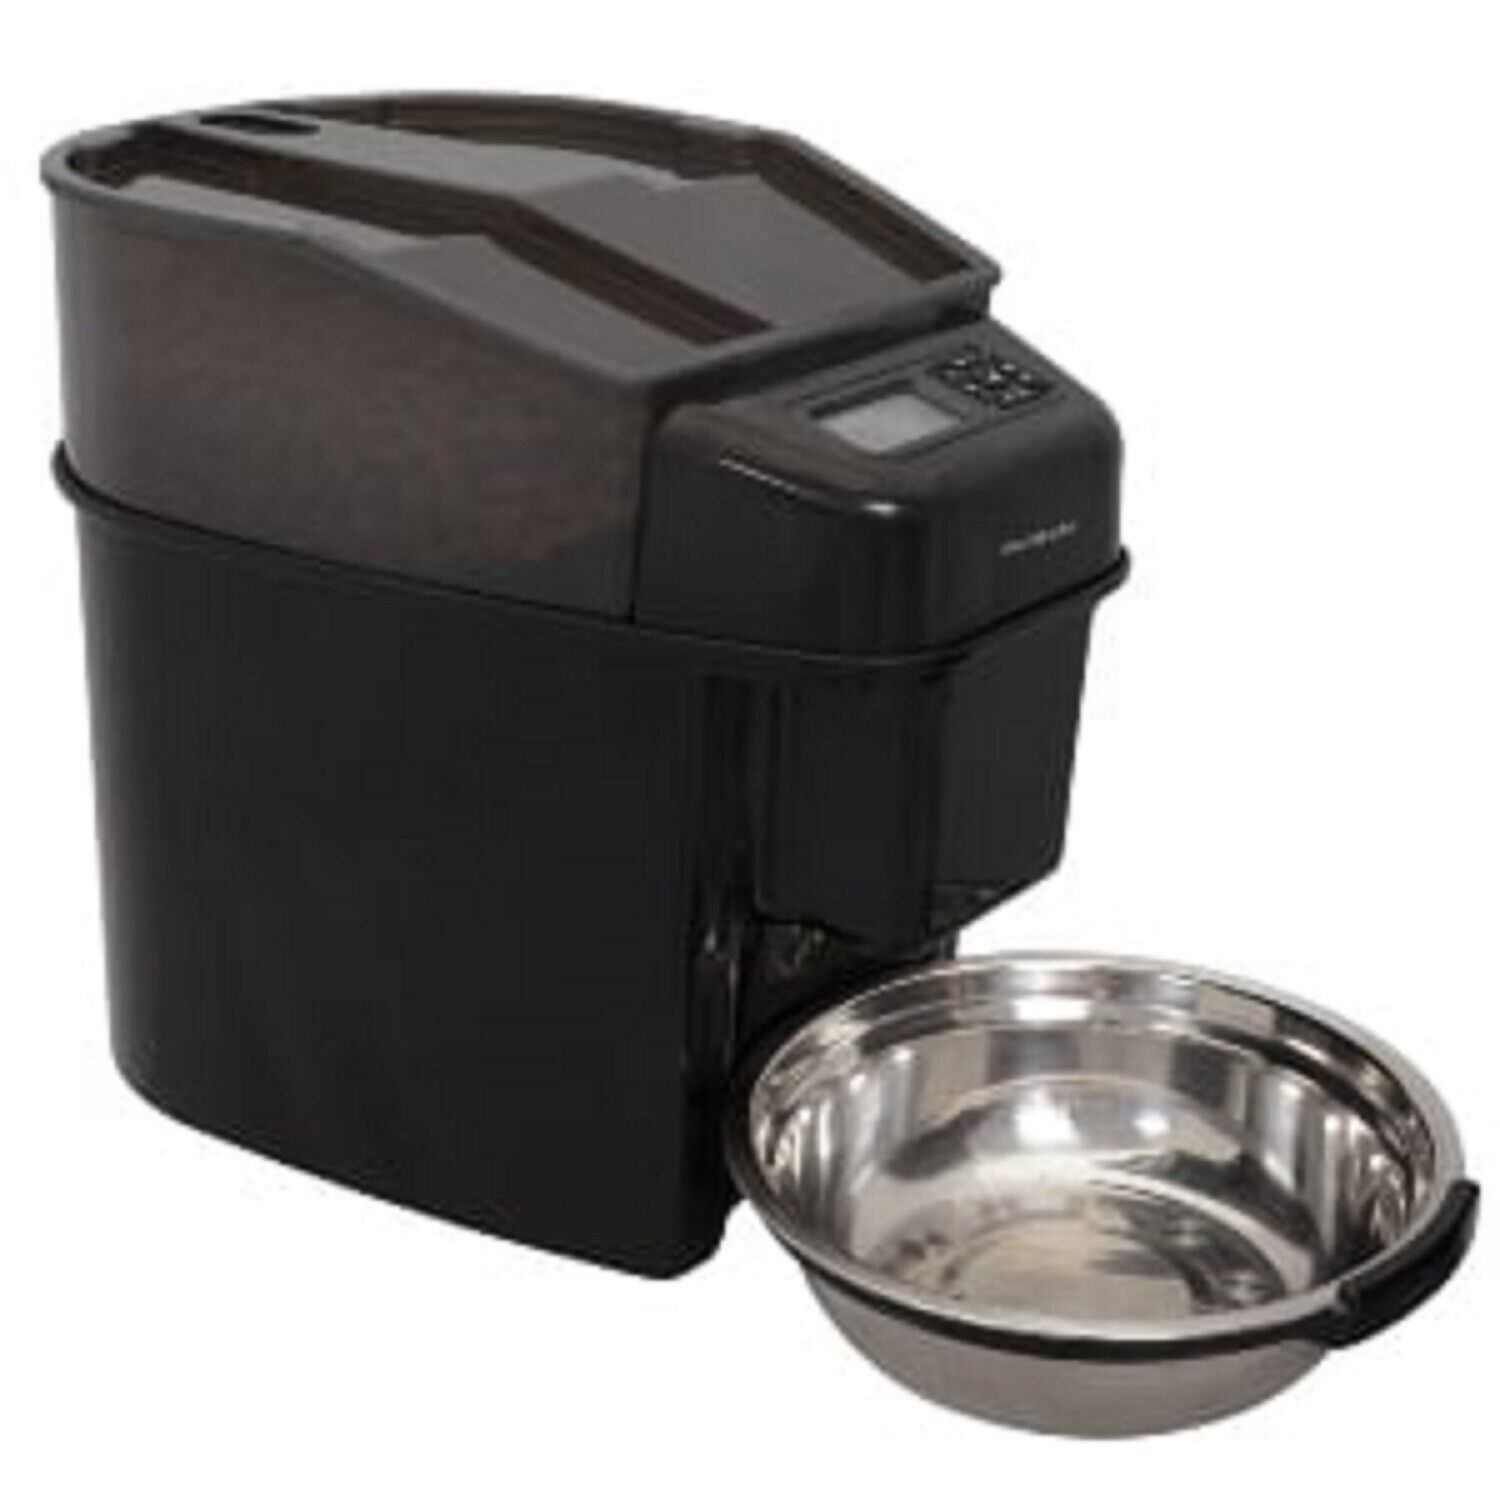 Primary image for PetSafe Healthy Pet Simply Feed Automatic Dog Feeder PFD00-14574 Black SS Bowl